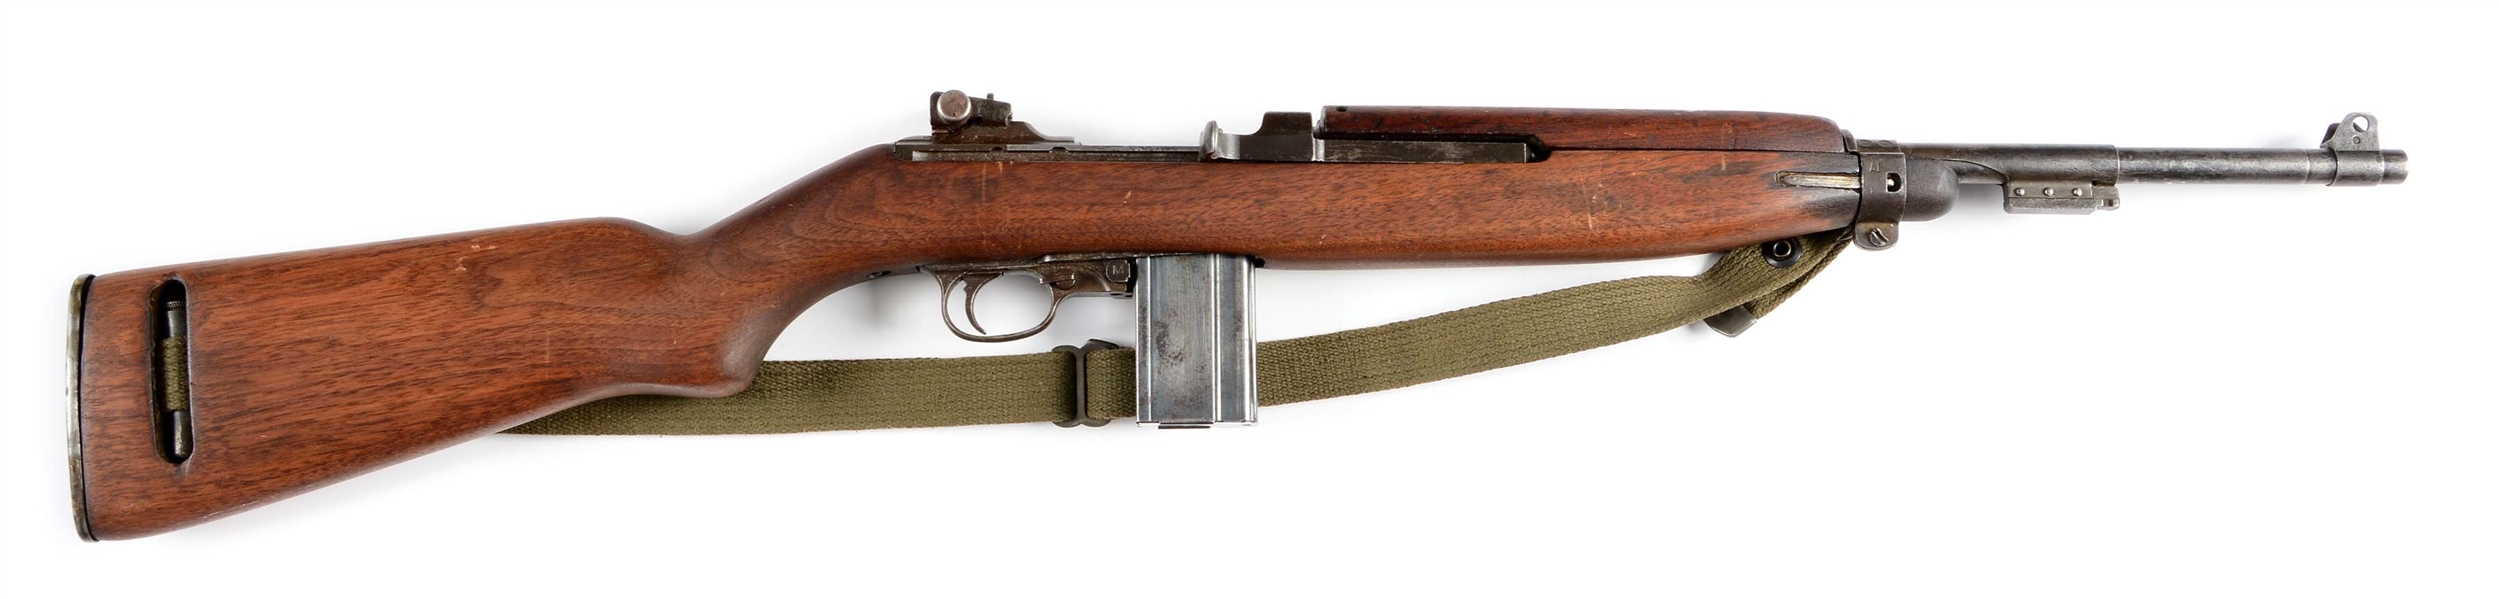 (C) WINCHESTER M1 CARBINE WITH SLING AND OILER